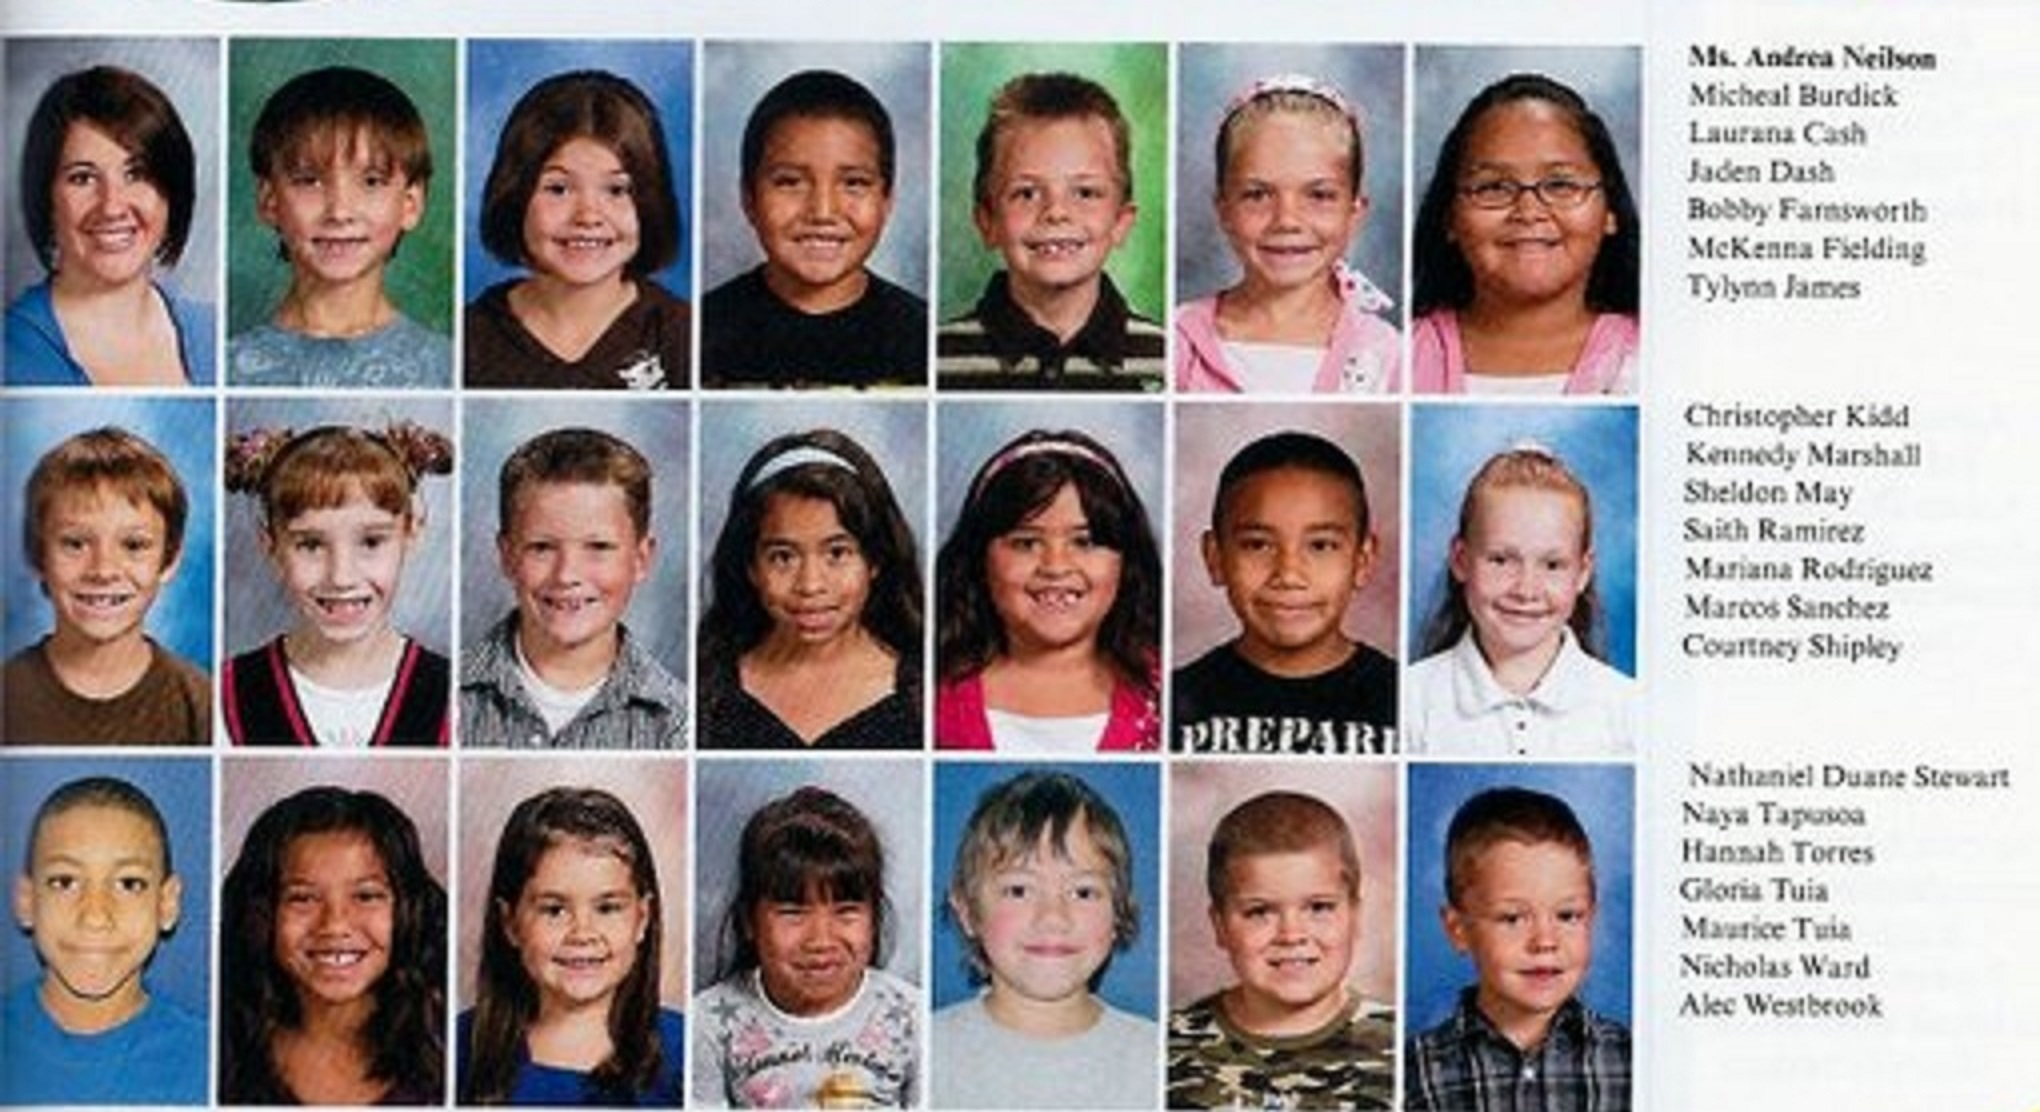 Mrs. Andrea Neilson's 2008-2009 second grade class at East Elementary School